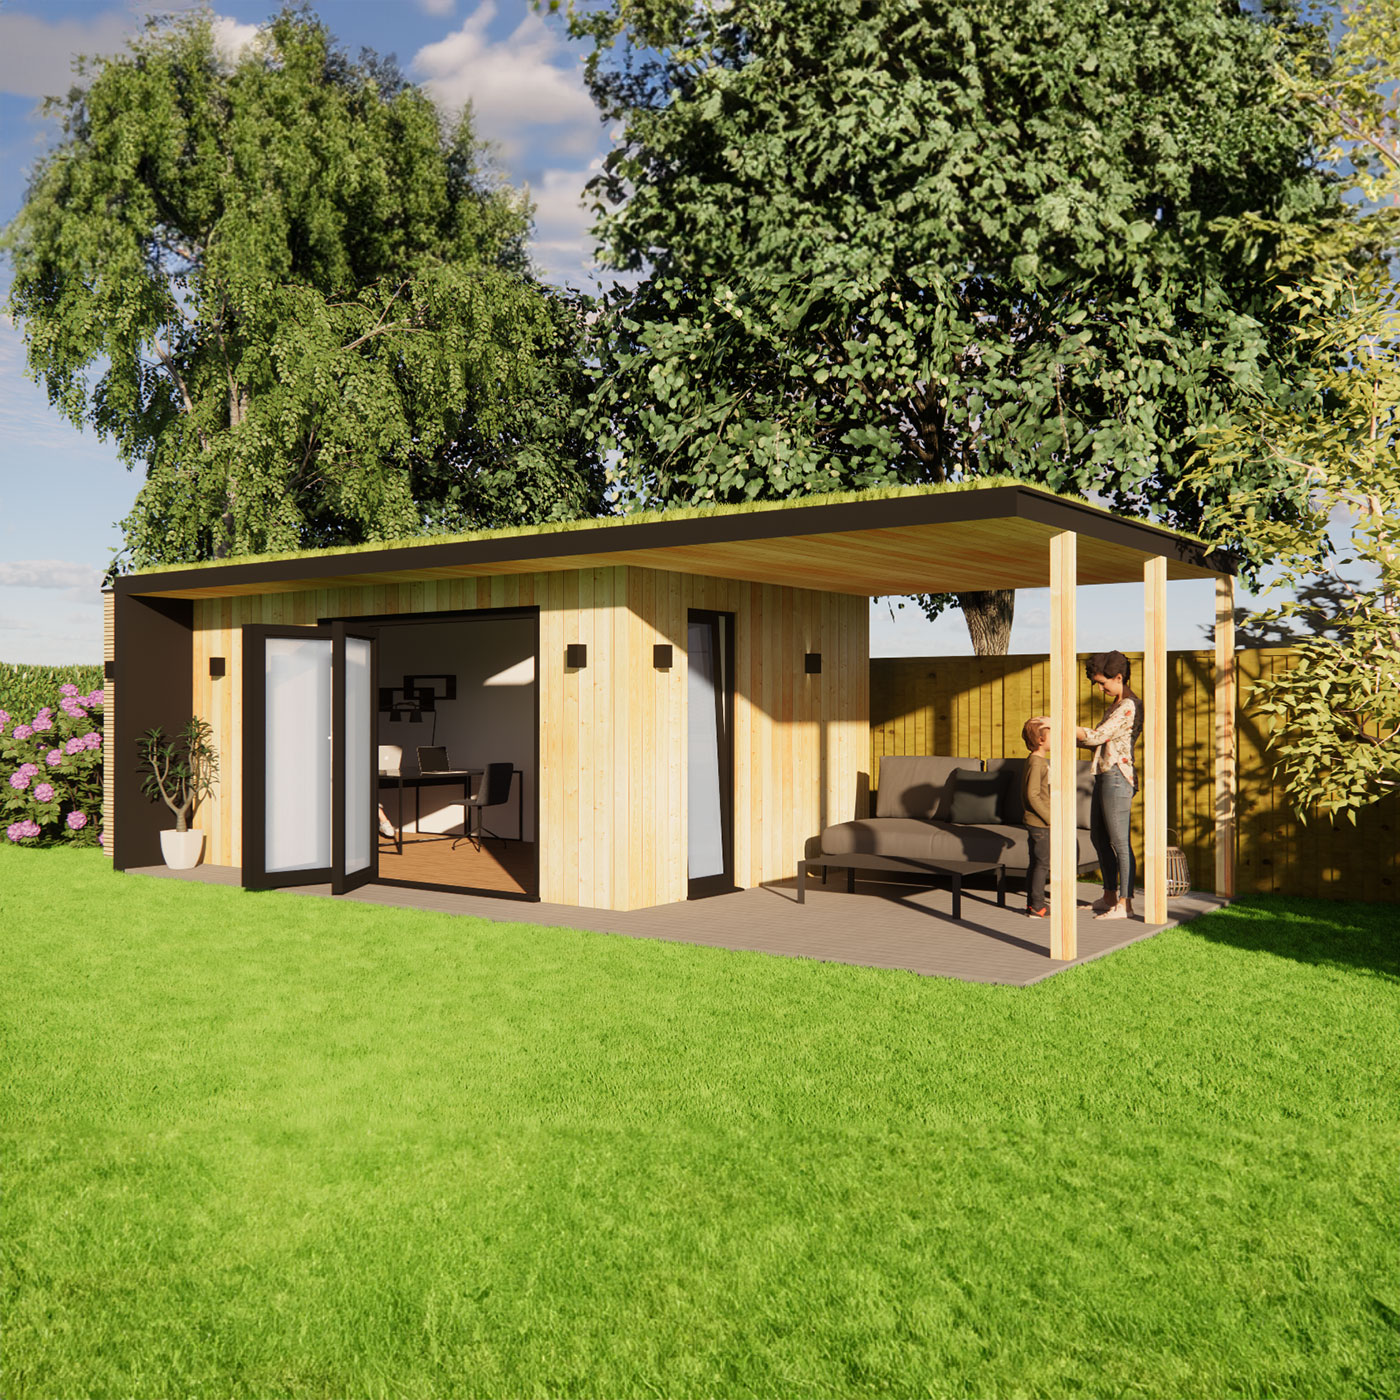 Visualisation of garden office with green roof 3.0m by 6.2m